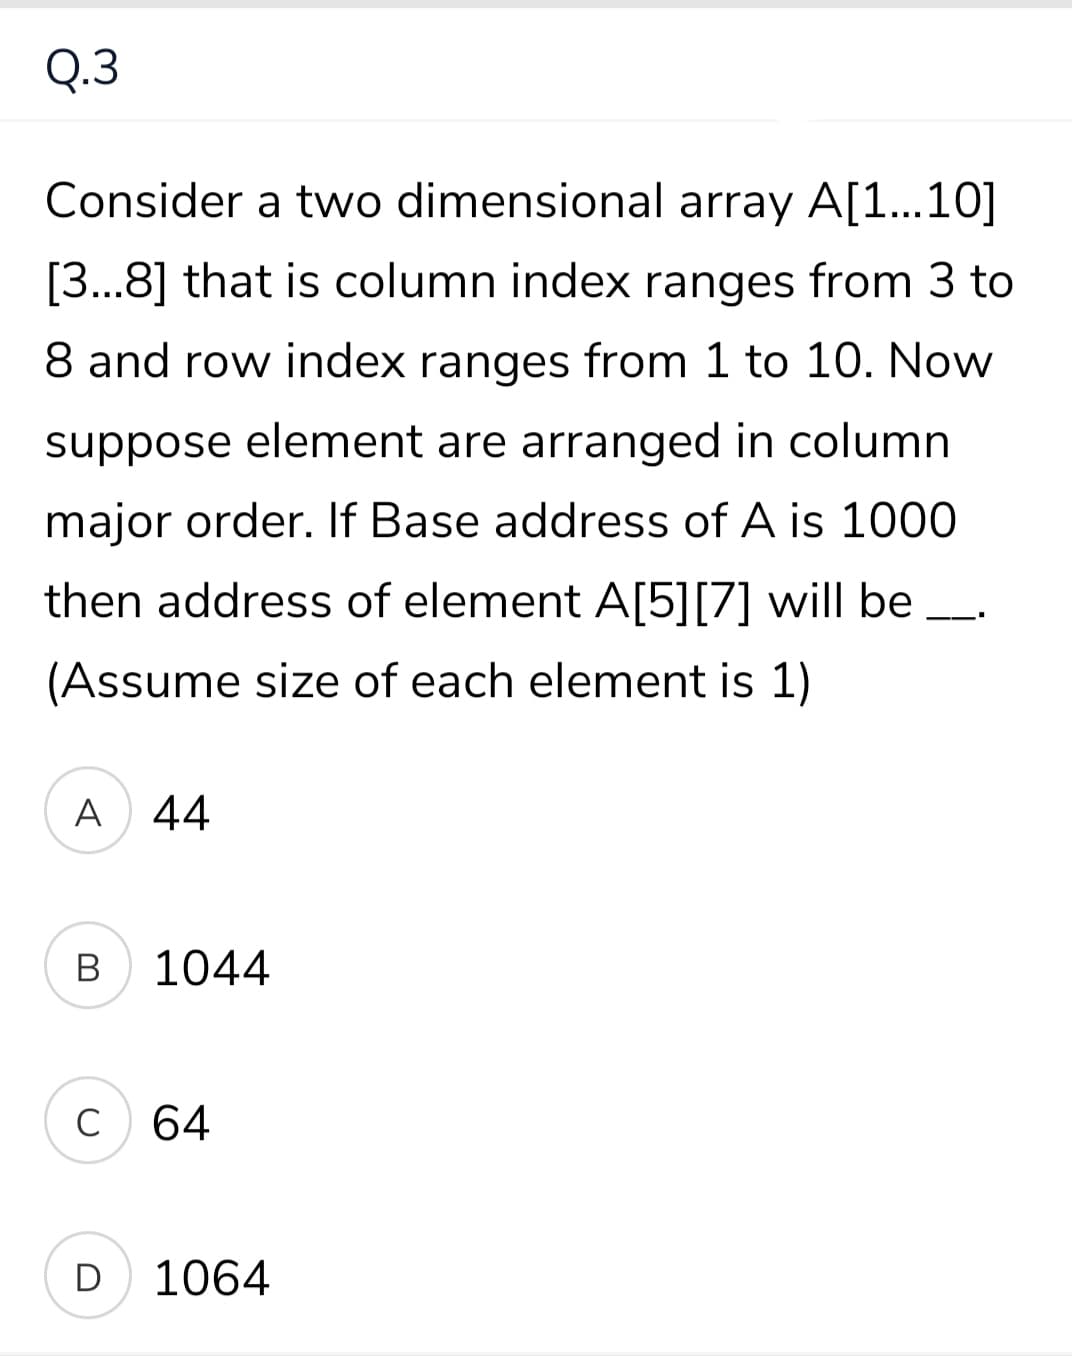 Q.3
Consider a two dimensional array A[1...10]
[3...8] that is column index ranges from 3 to
8 and row index ranges from 1 to 10. Now
suppose element are arranged in column
major order. If Base address of A is 1000
then address of element A[5][7] will be
(Assume size of each element is 1)
A
44
В
1044
C
C 64
D
1064
